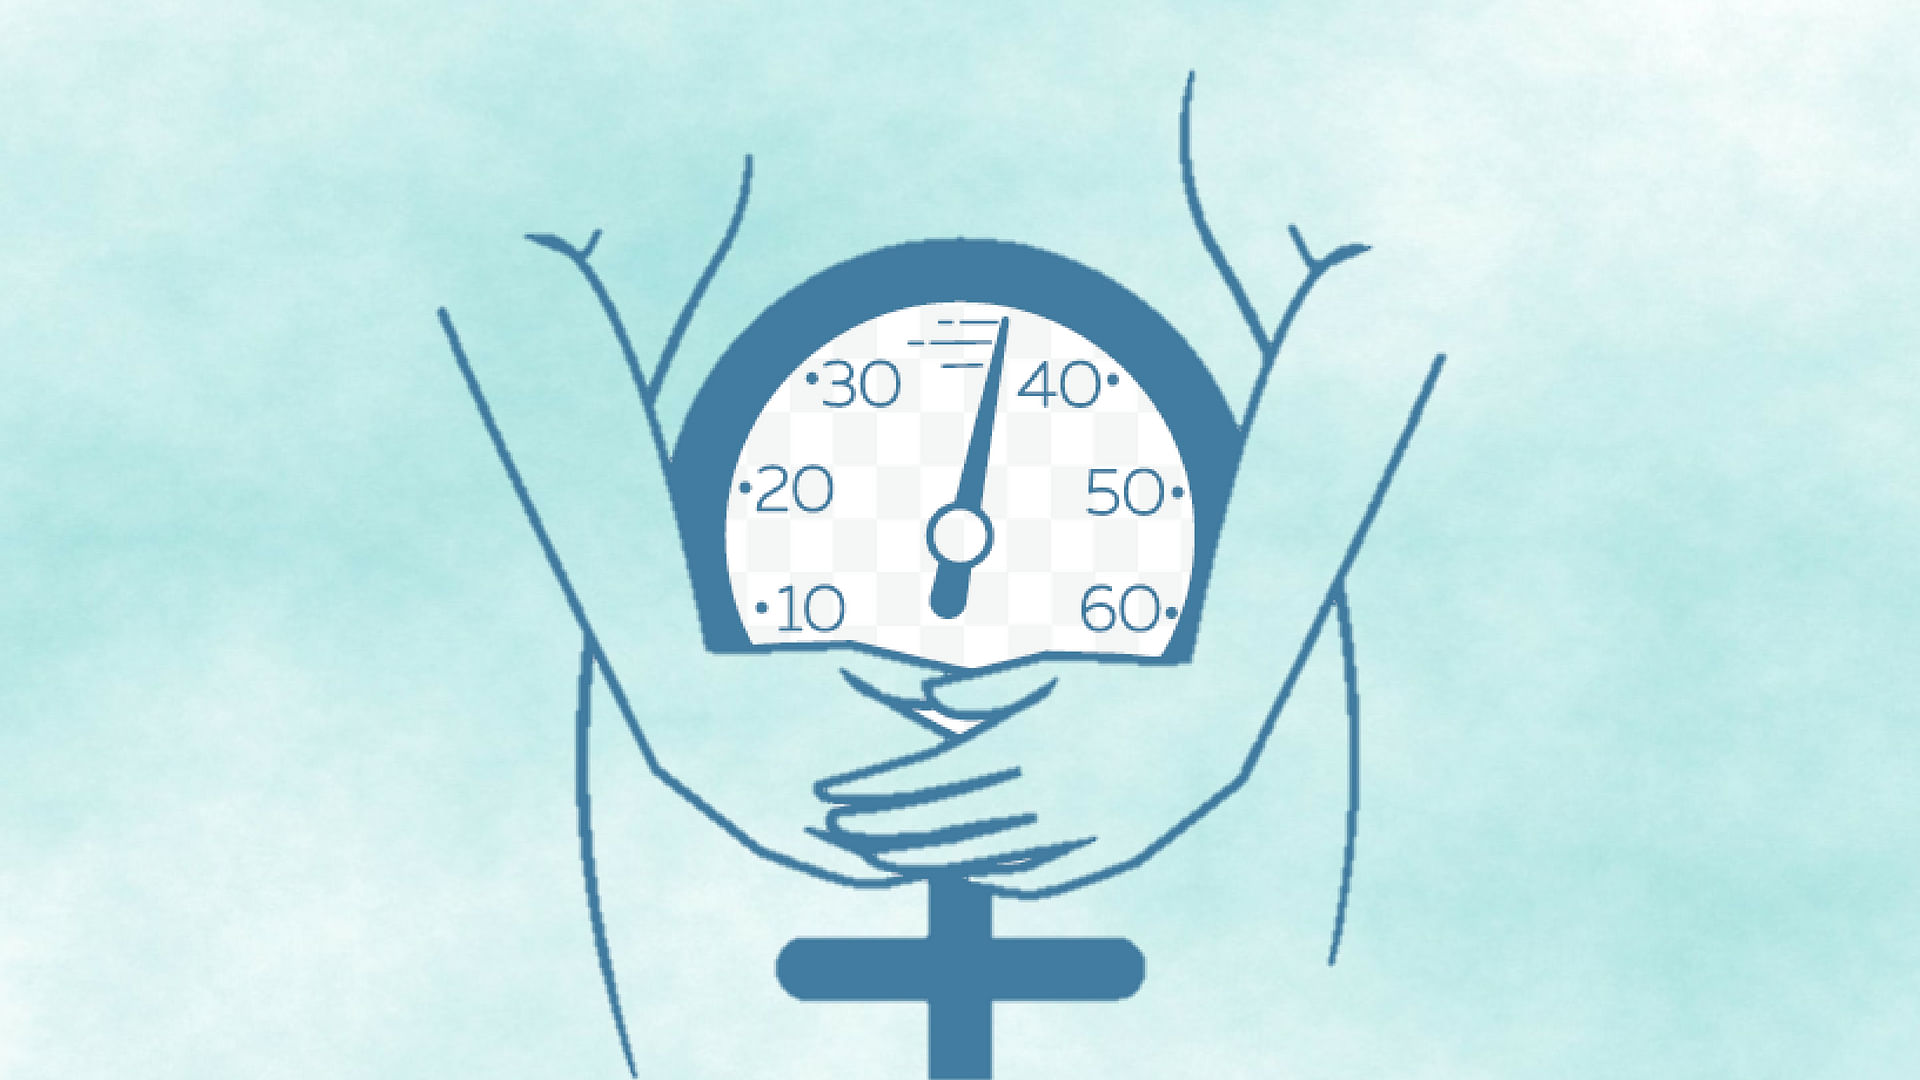 Women who experience premature menopause are almost three times more likely to develop multiple, chronic medical problems in their 60s.